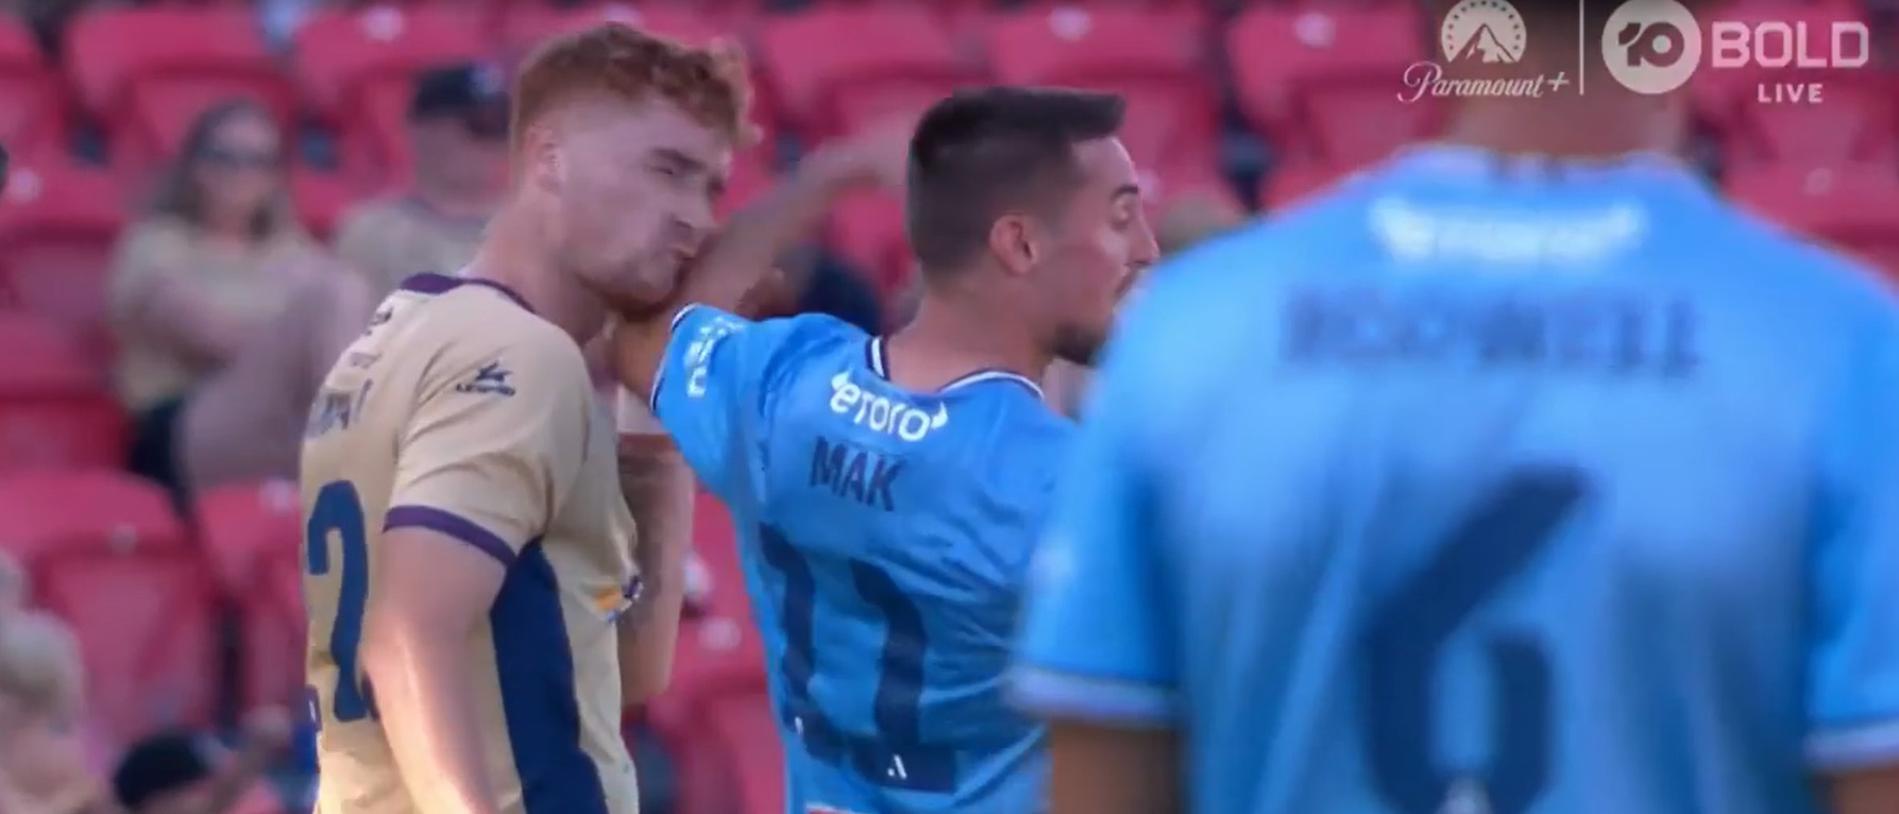 A surprising red card in the A-League.